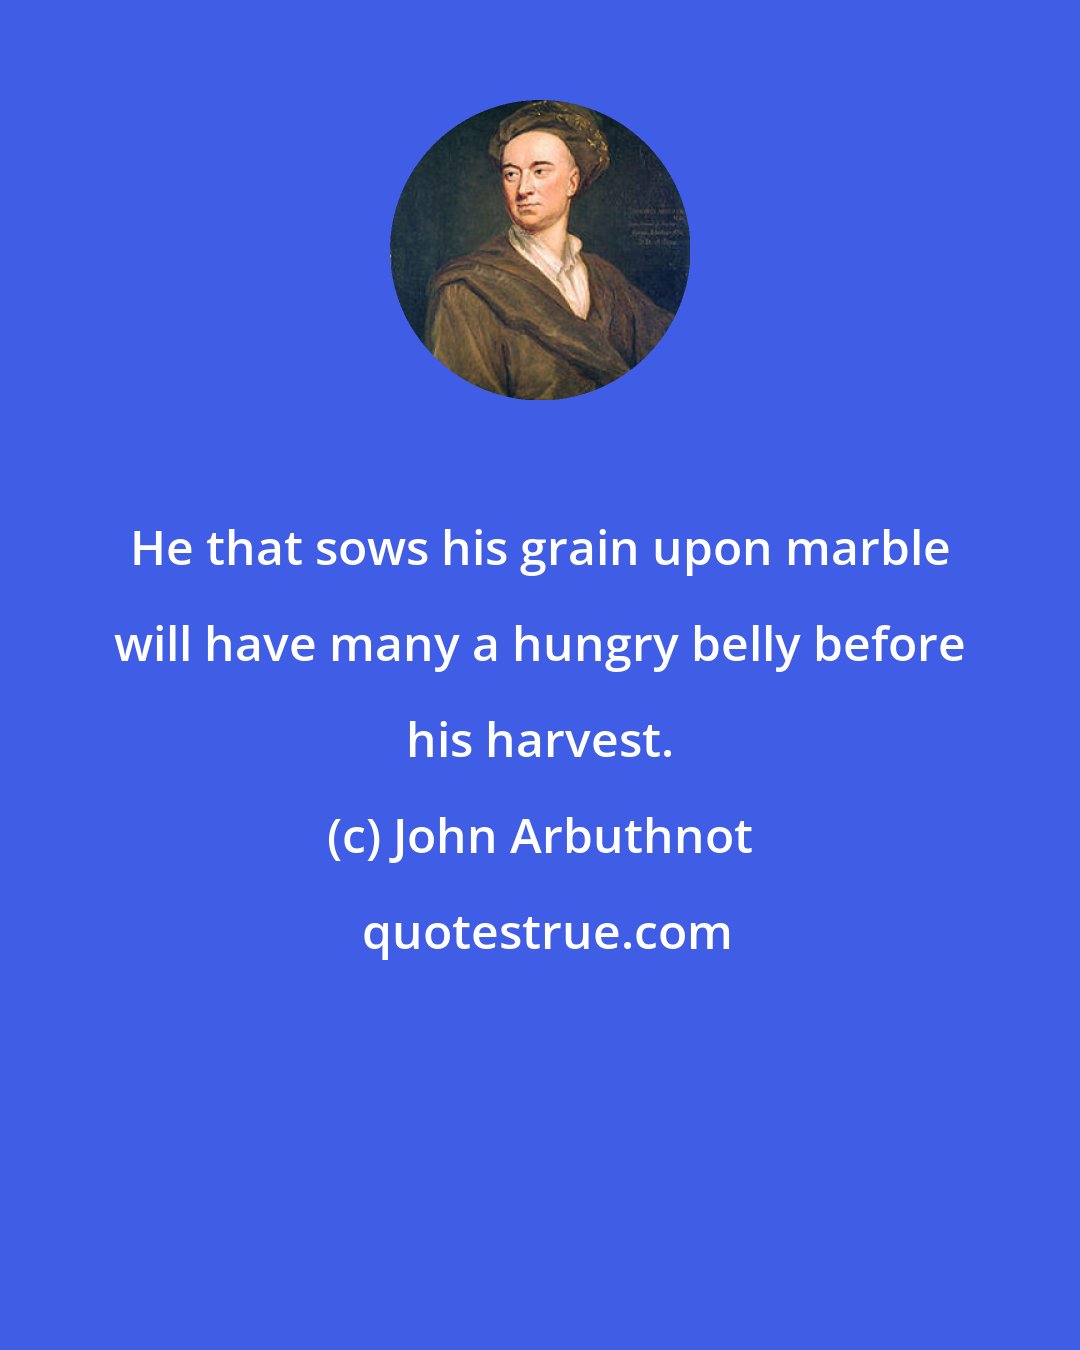 John Arbuthnot: He that sows his grain upon marble will have many a hungry belly before his harvest.